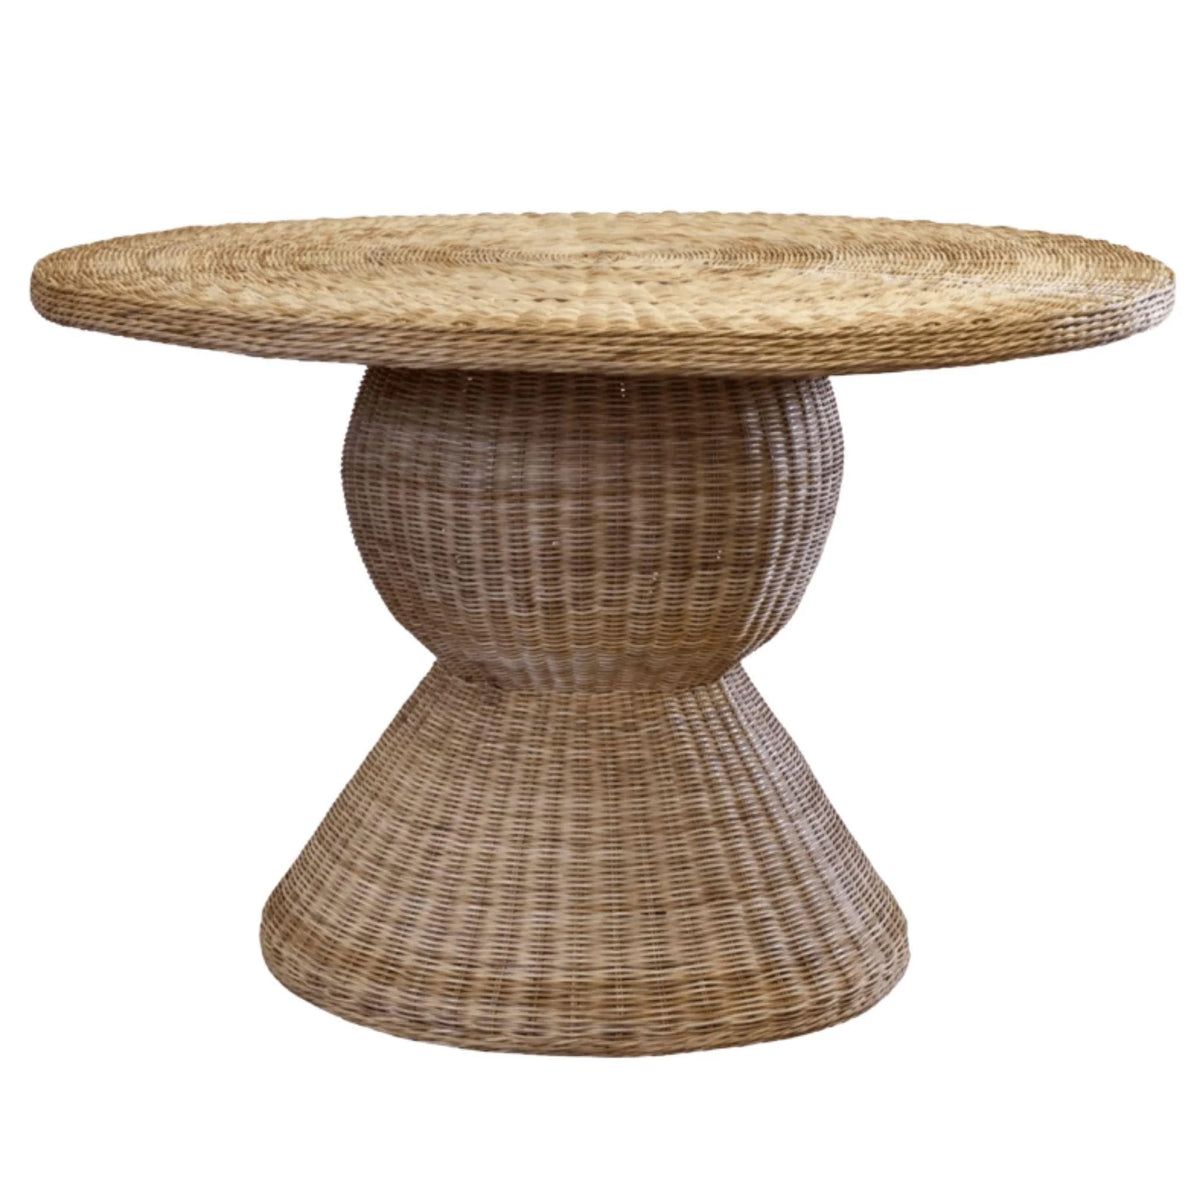 Wicker Pedestal Bauble Dining Table 48" | The Well Appointed House, LLC